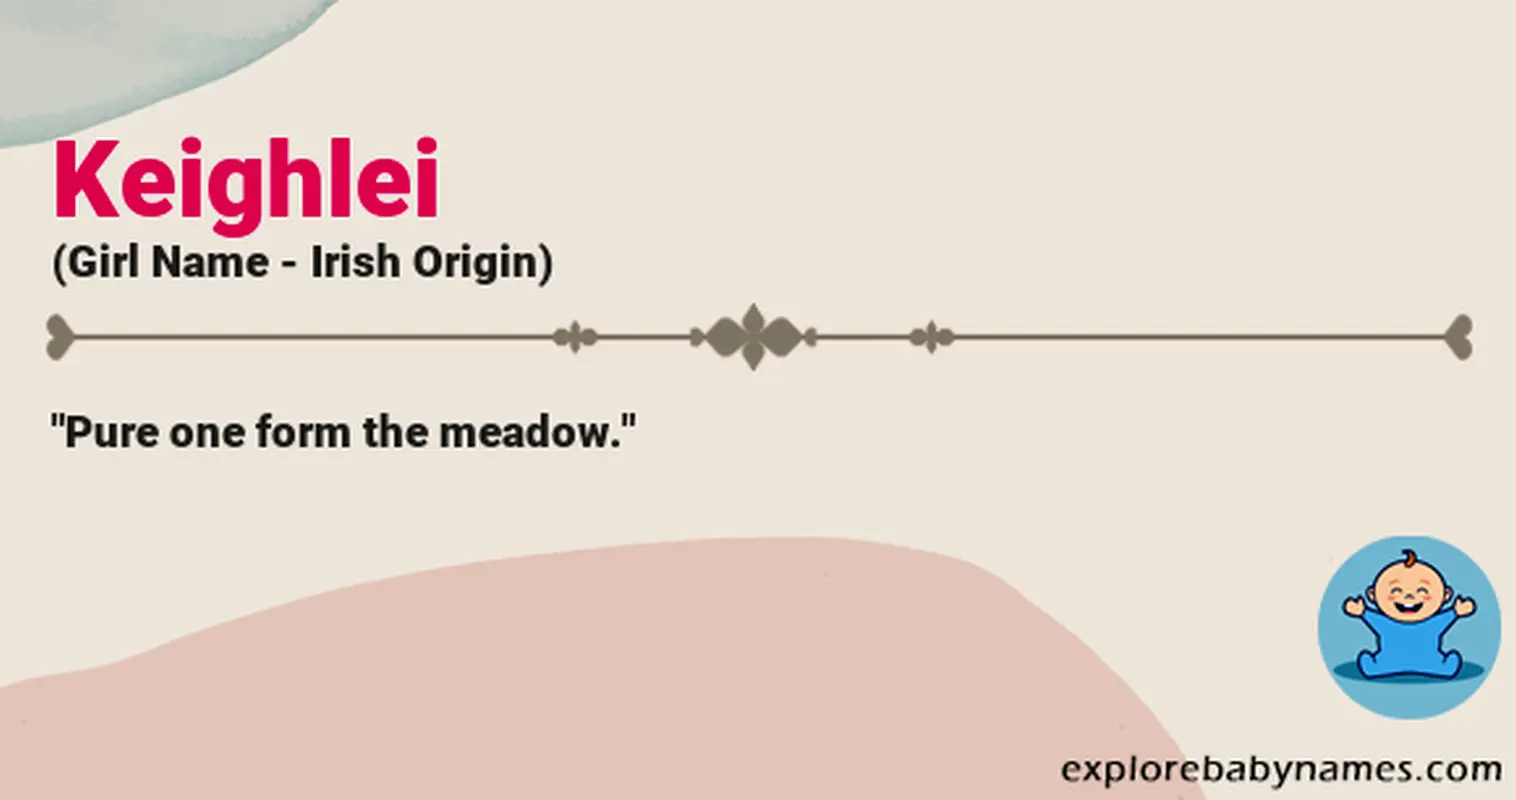 Meaning of Keighlei